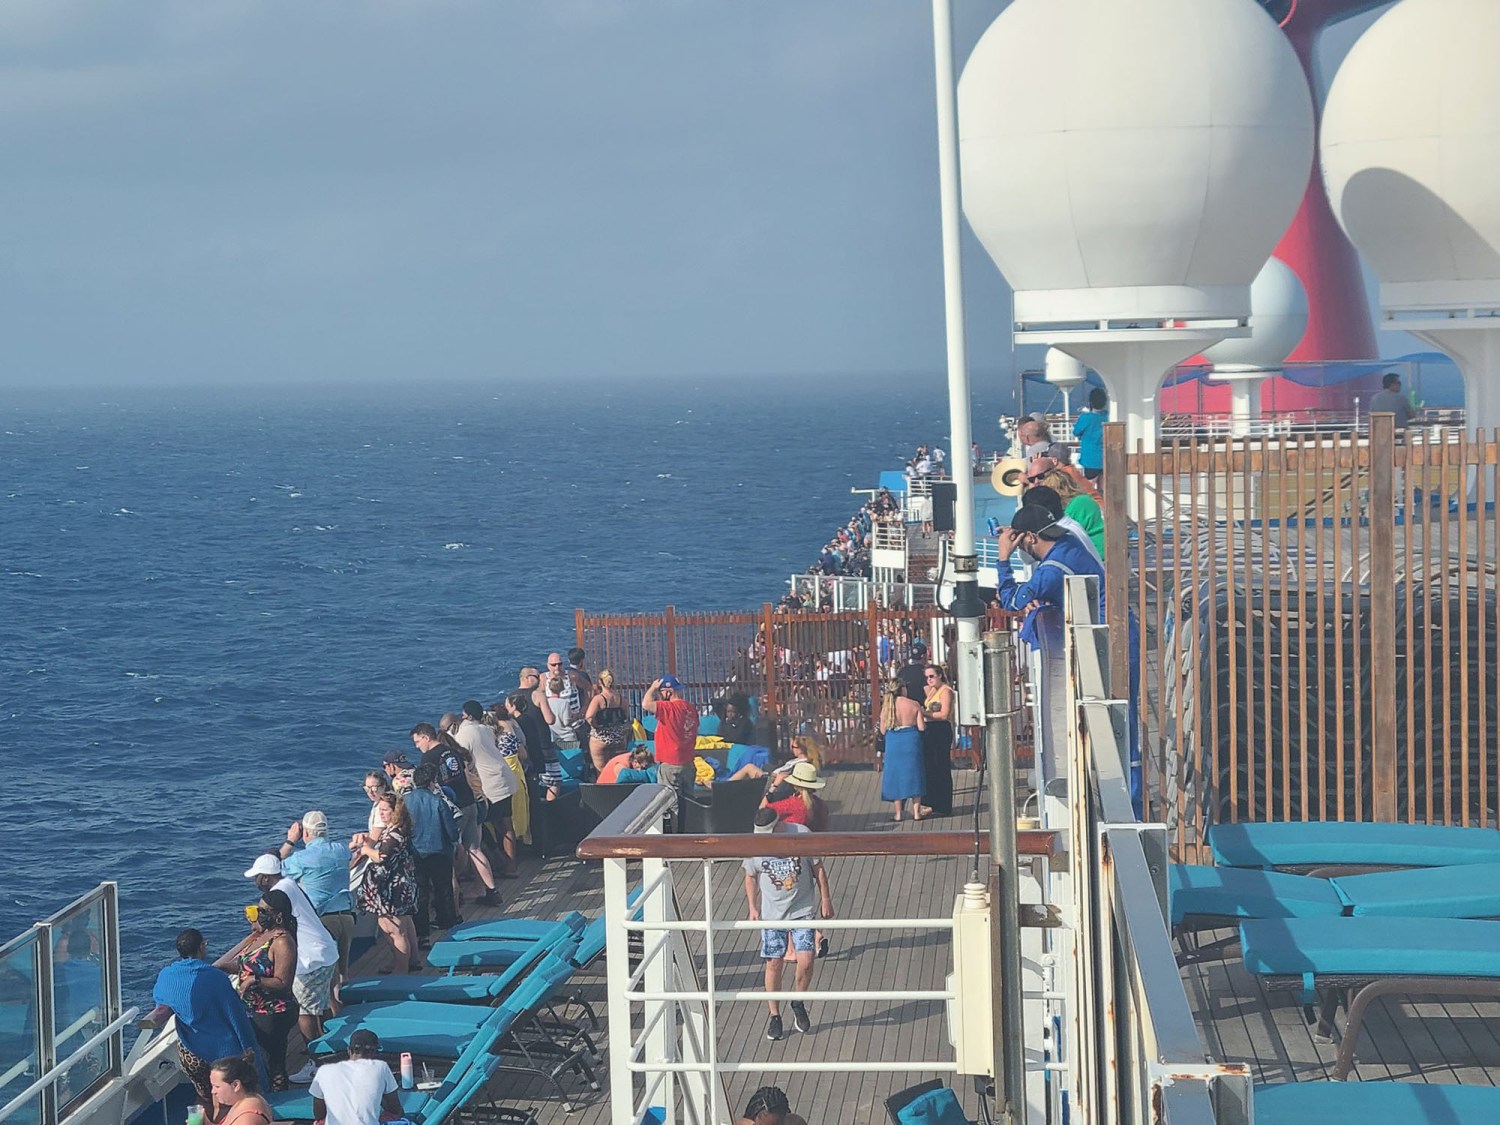 Passengers On Cruise Ship Where Woman Jumped To Her Death Want Carnival To Pay